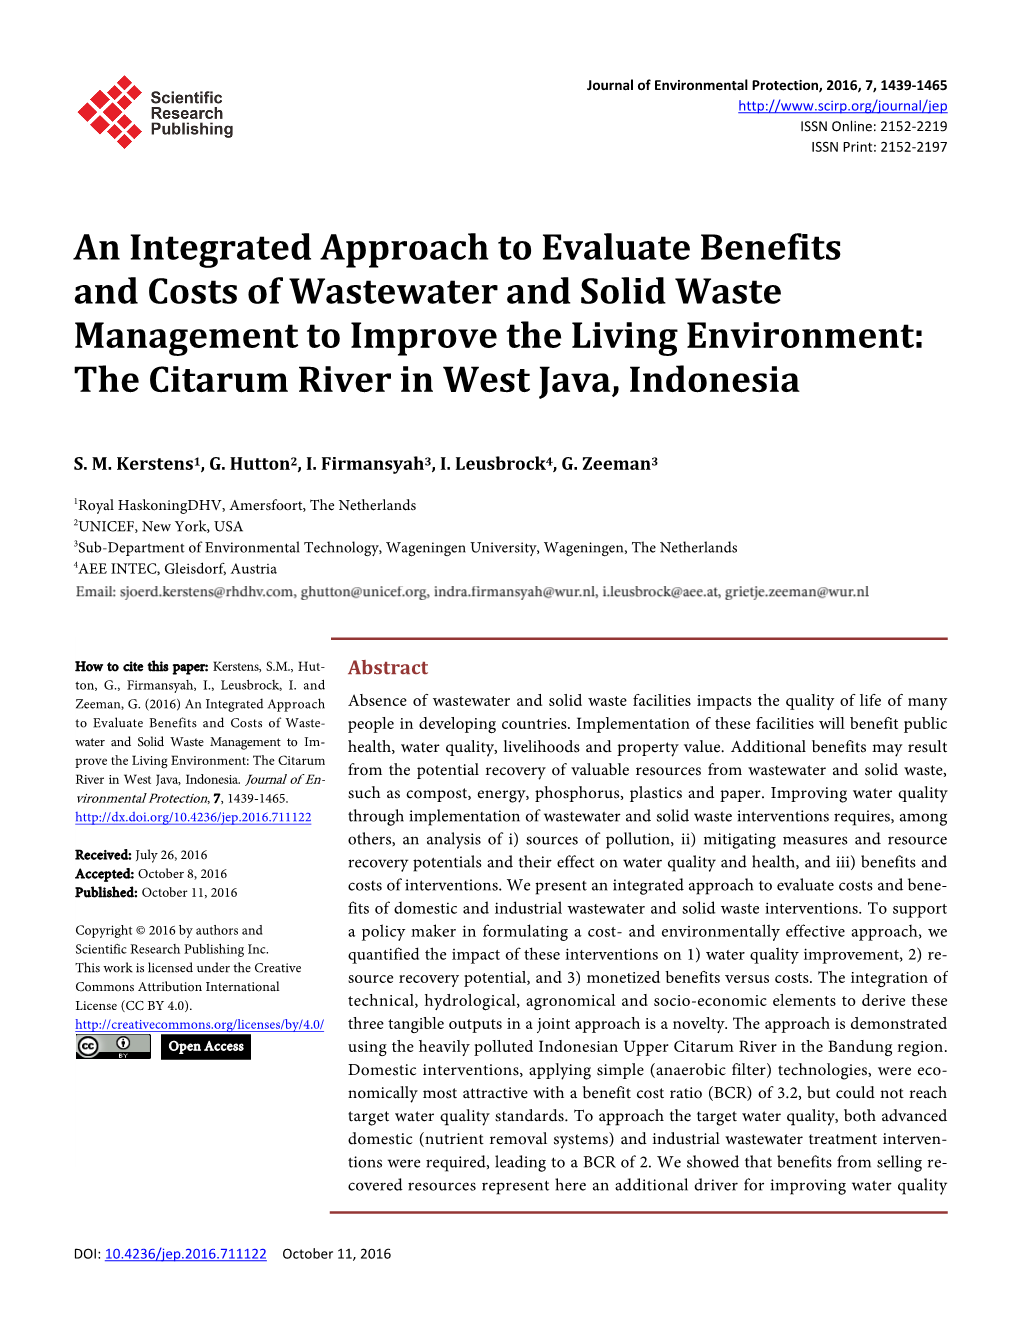 An Integrated Approach to Evaluate Benefits and Costs of Wastewater